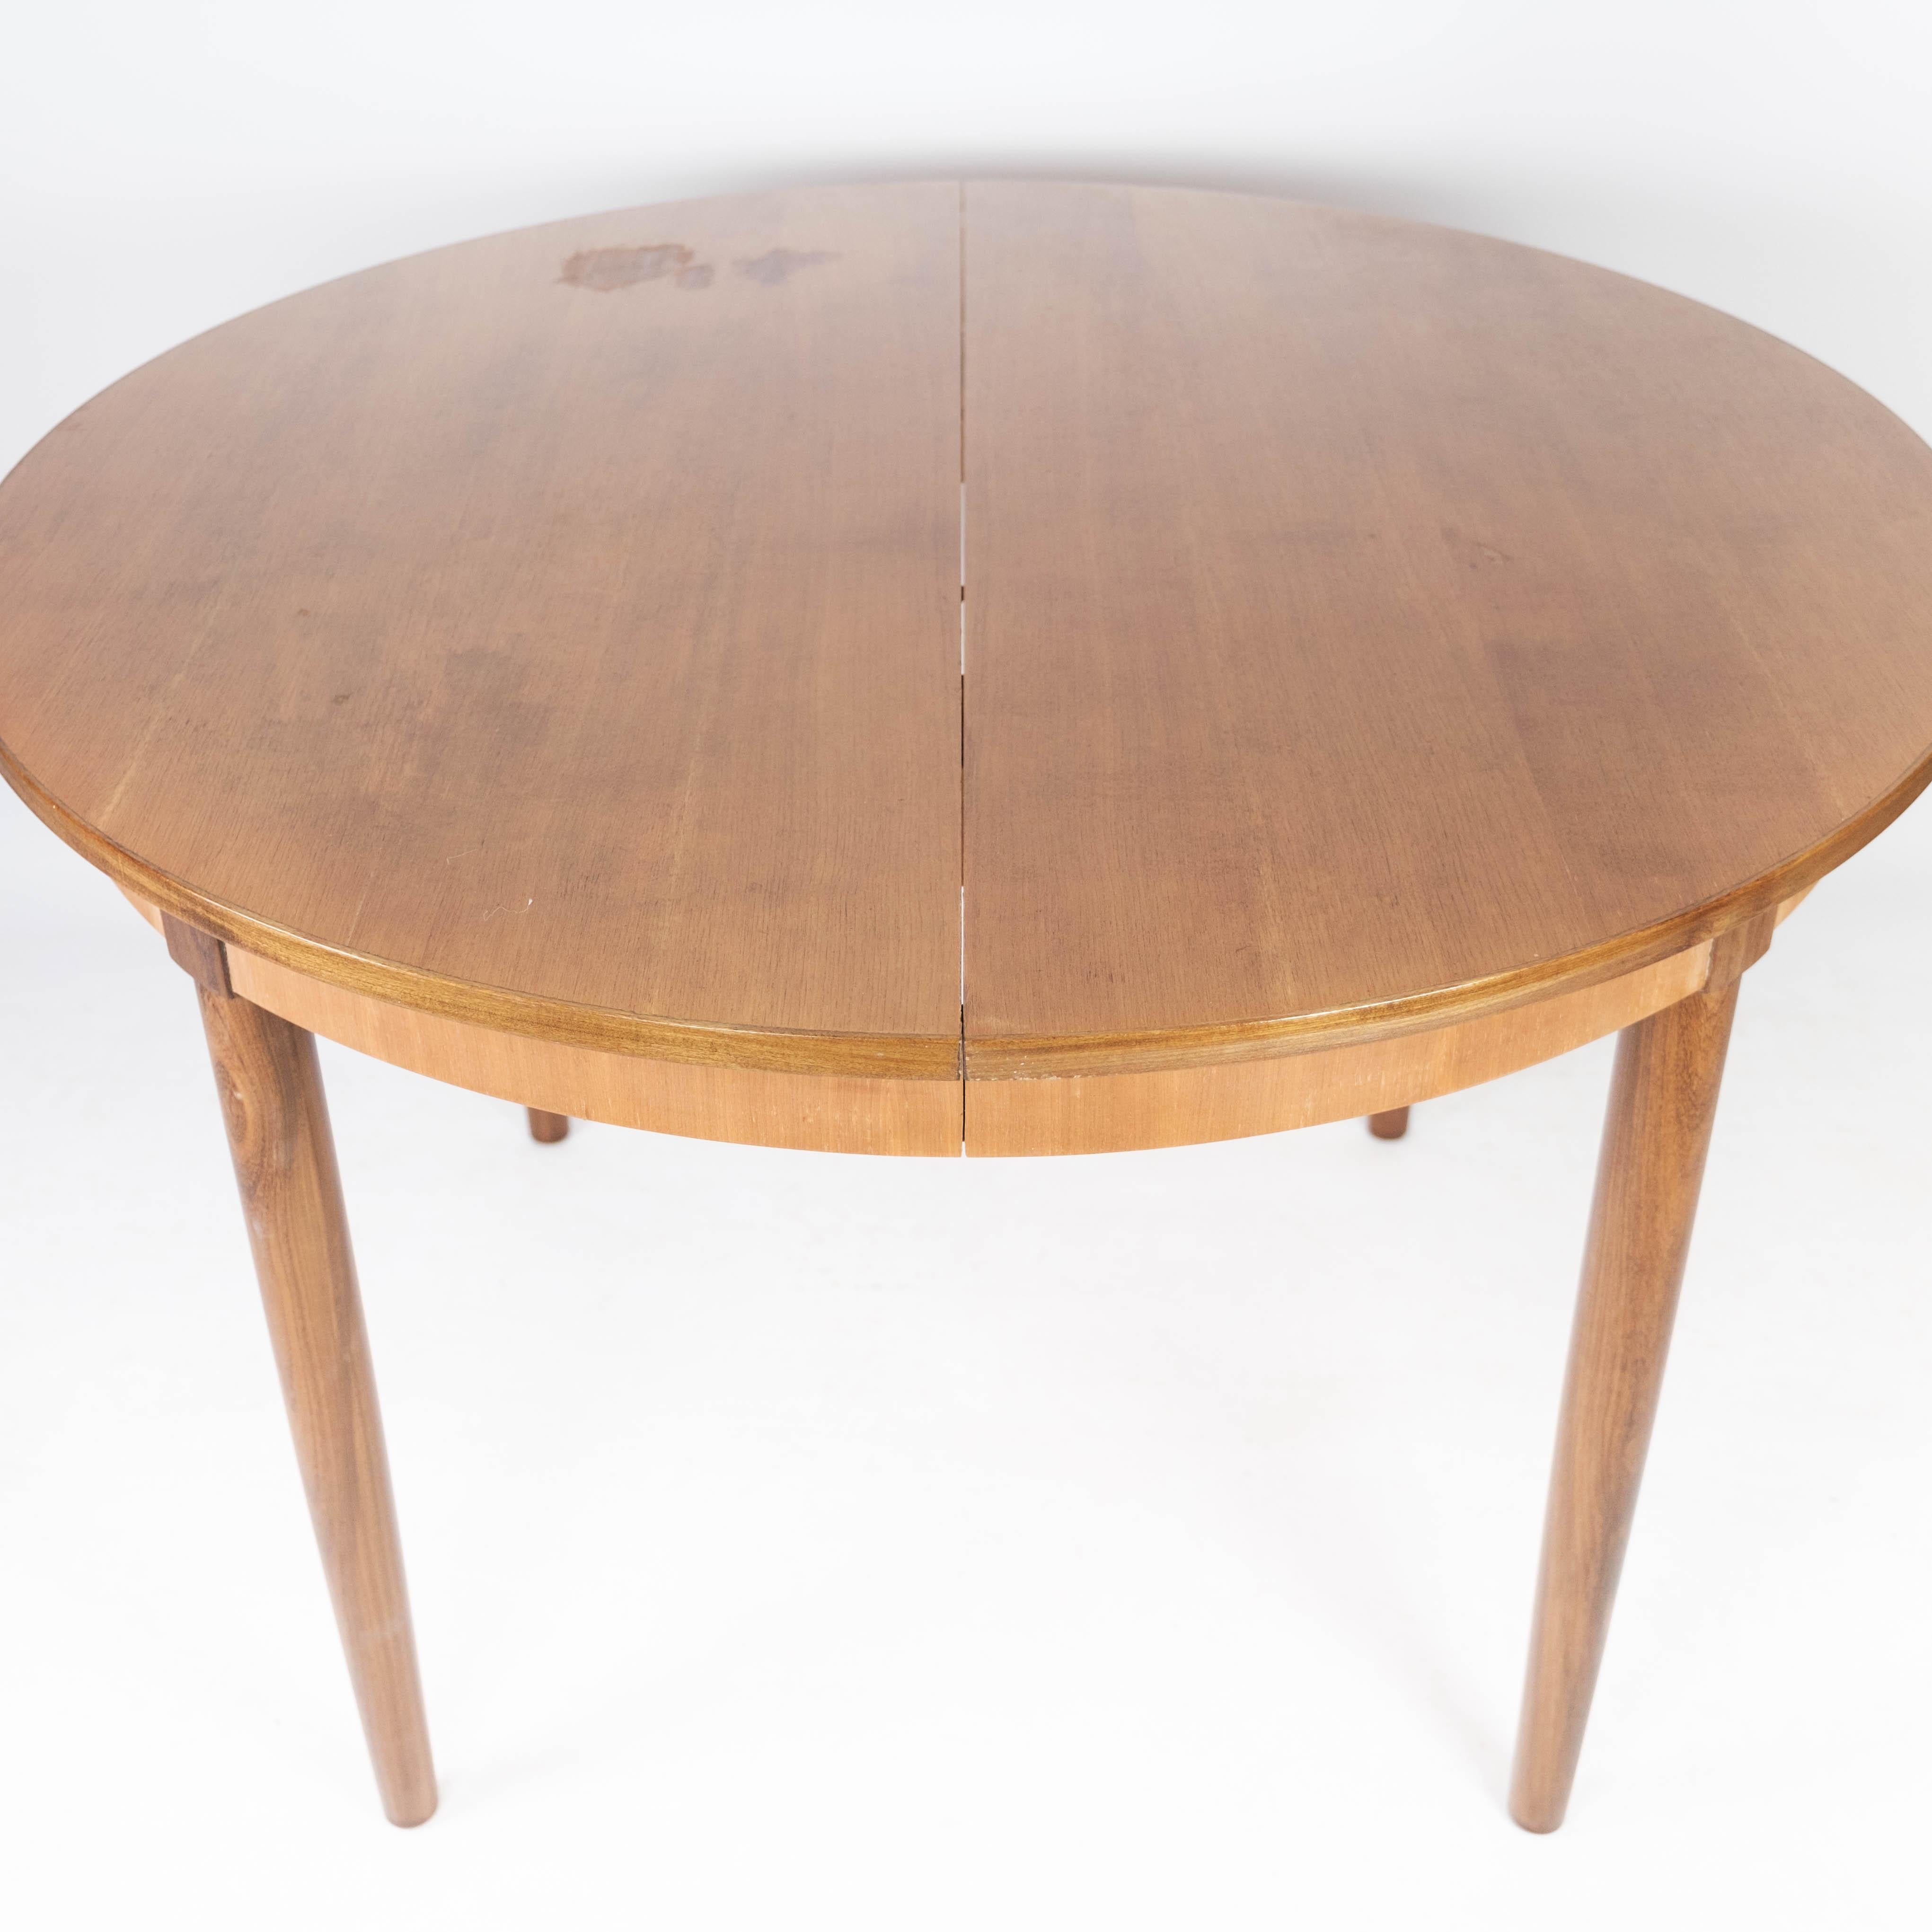 Mid-Century Modern Dining Table Made In Teak With Extensions, Danish Design From 1960s For Sale